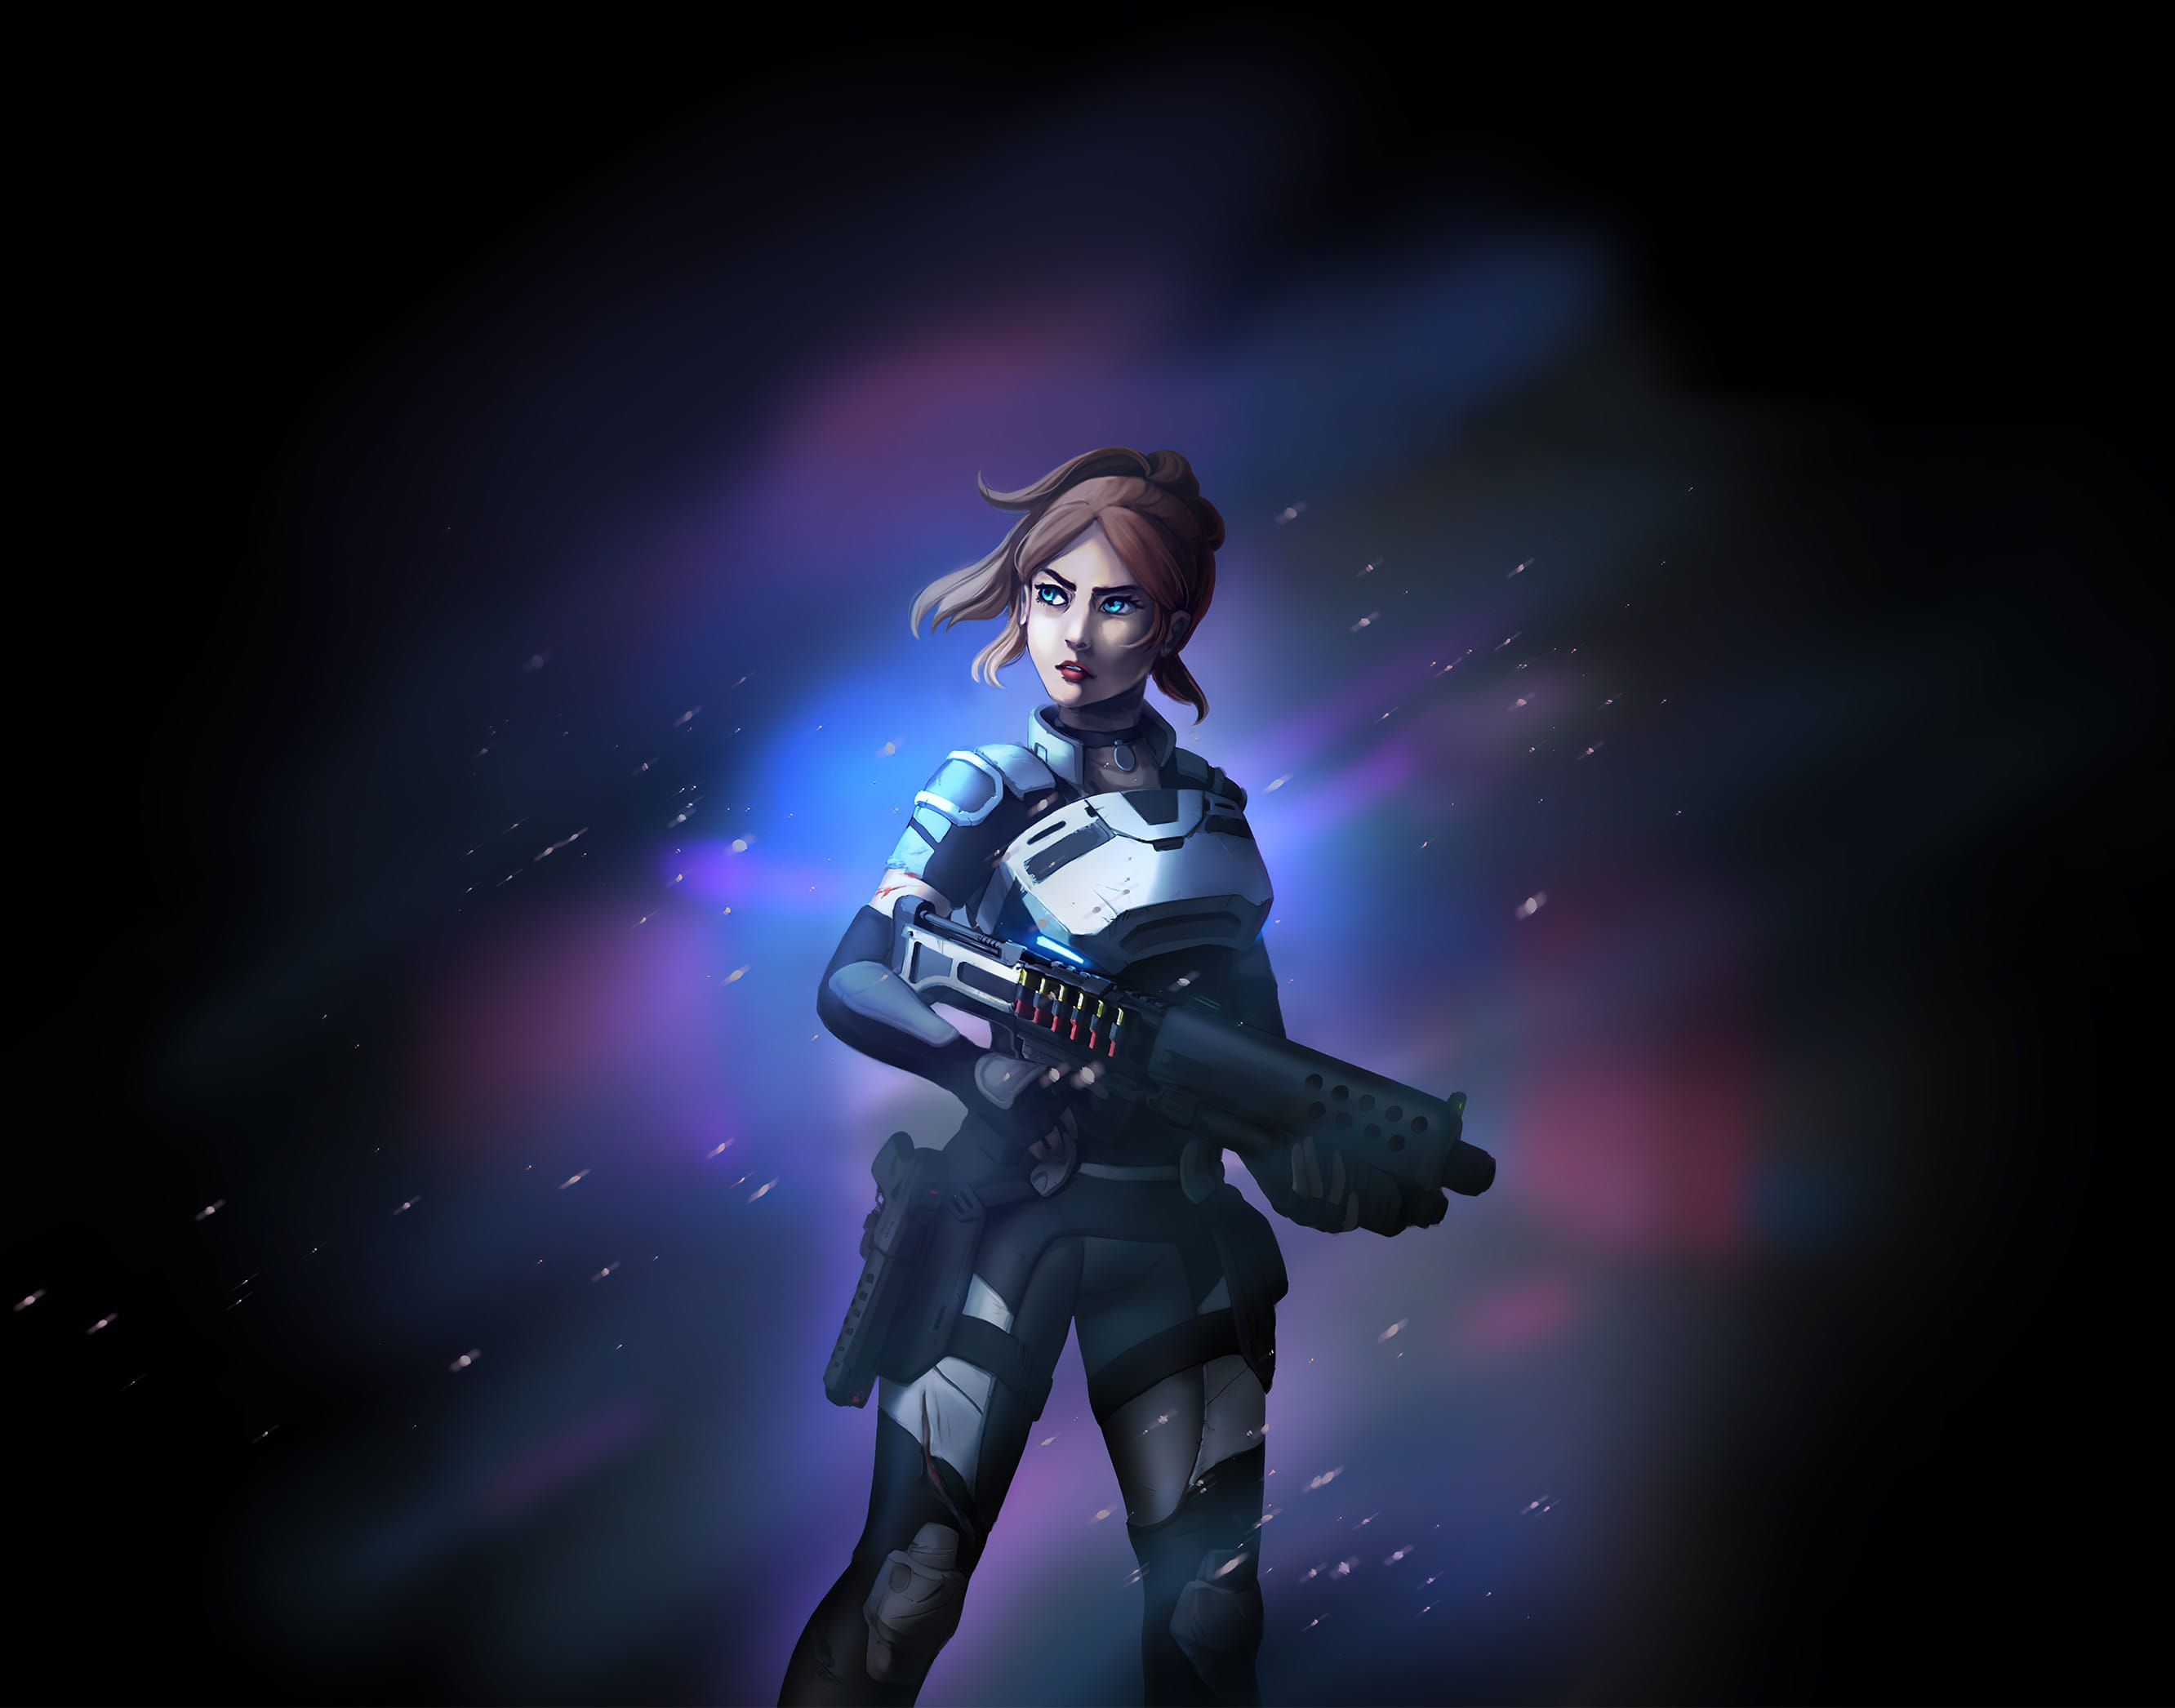 Protagonist Dawn with a Nebula behind her